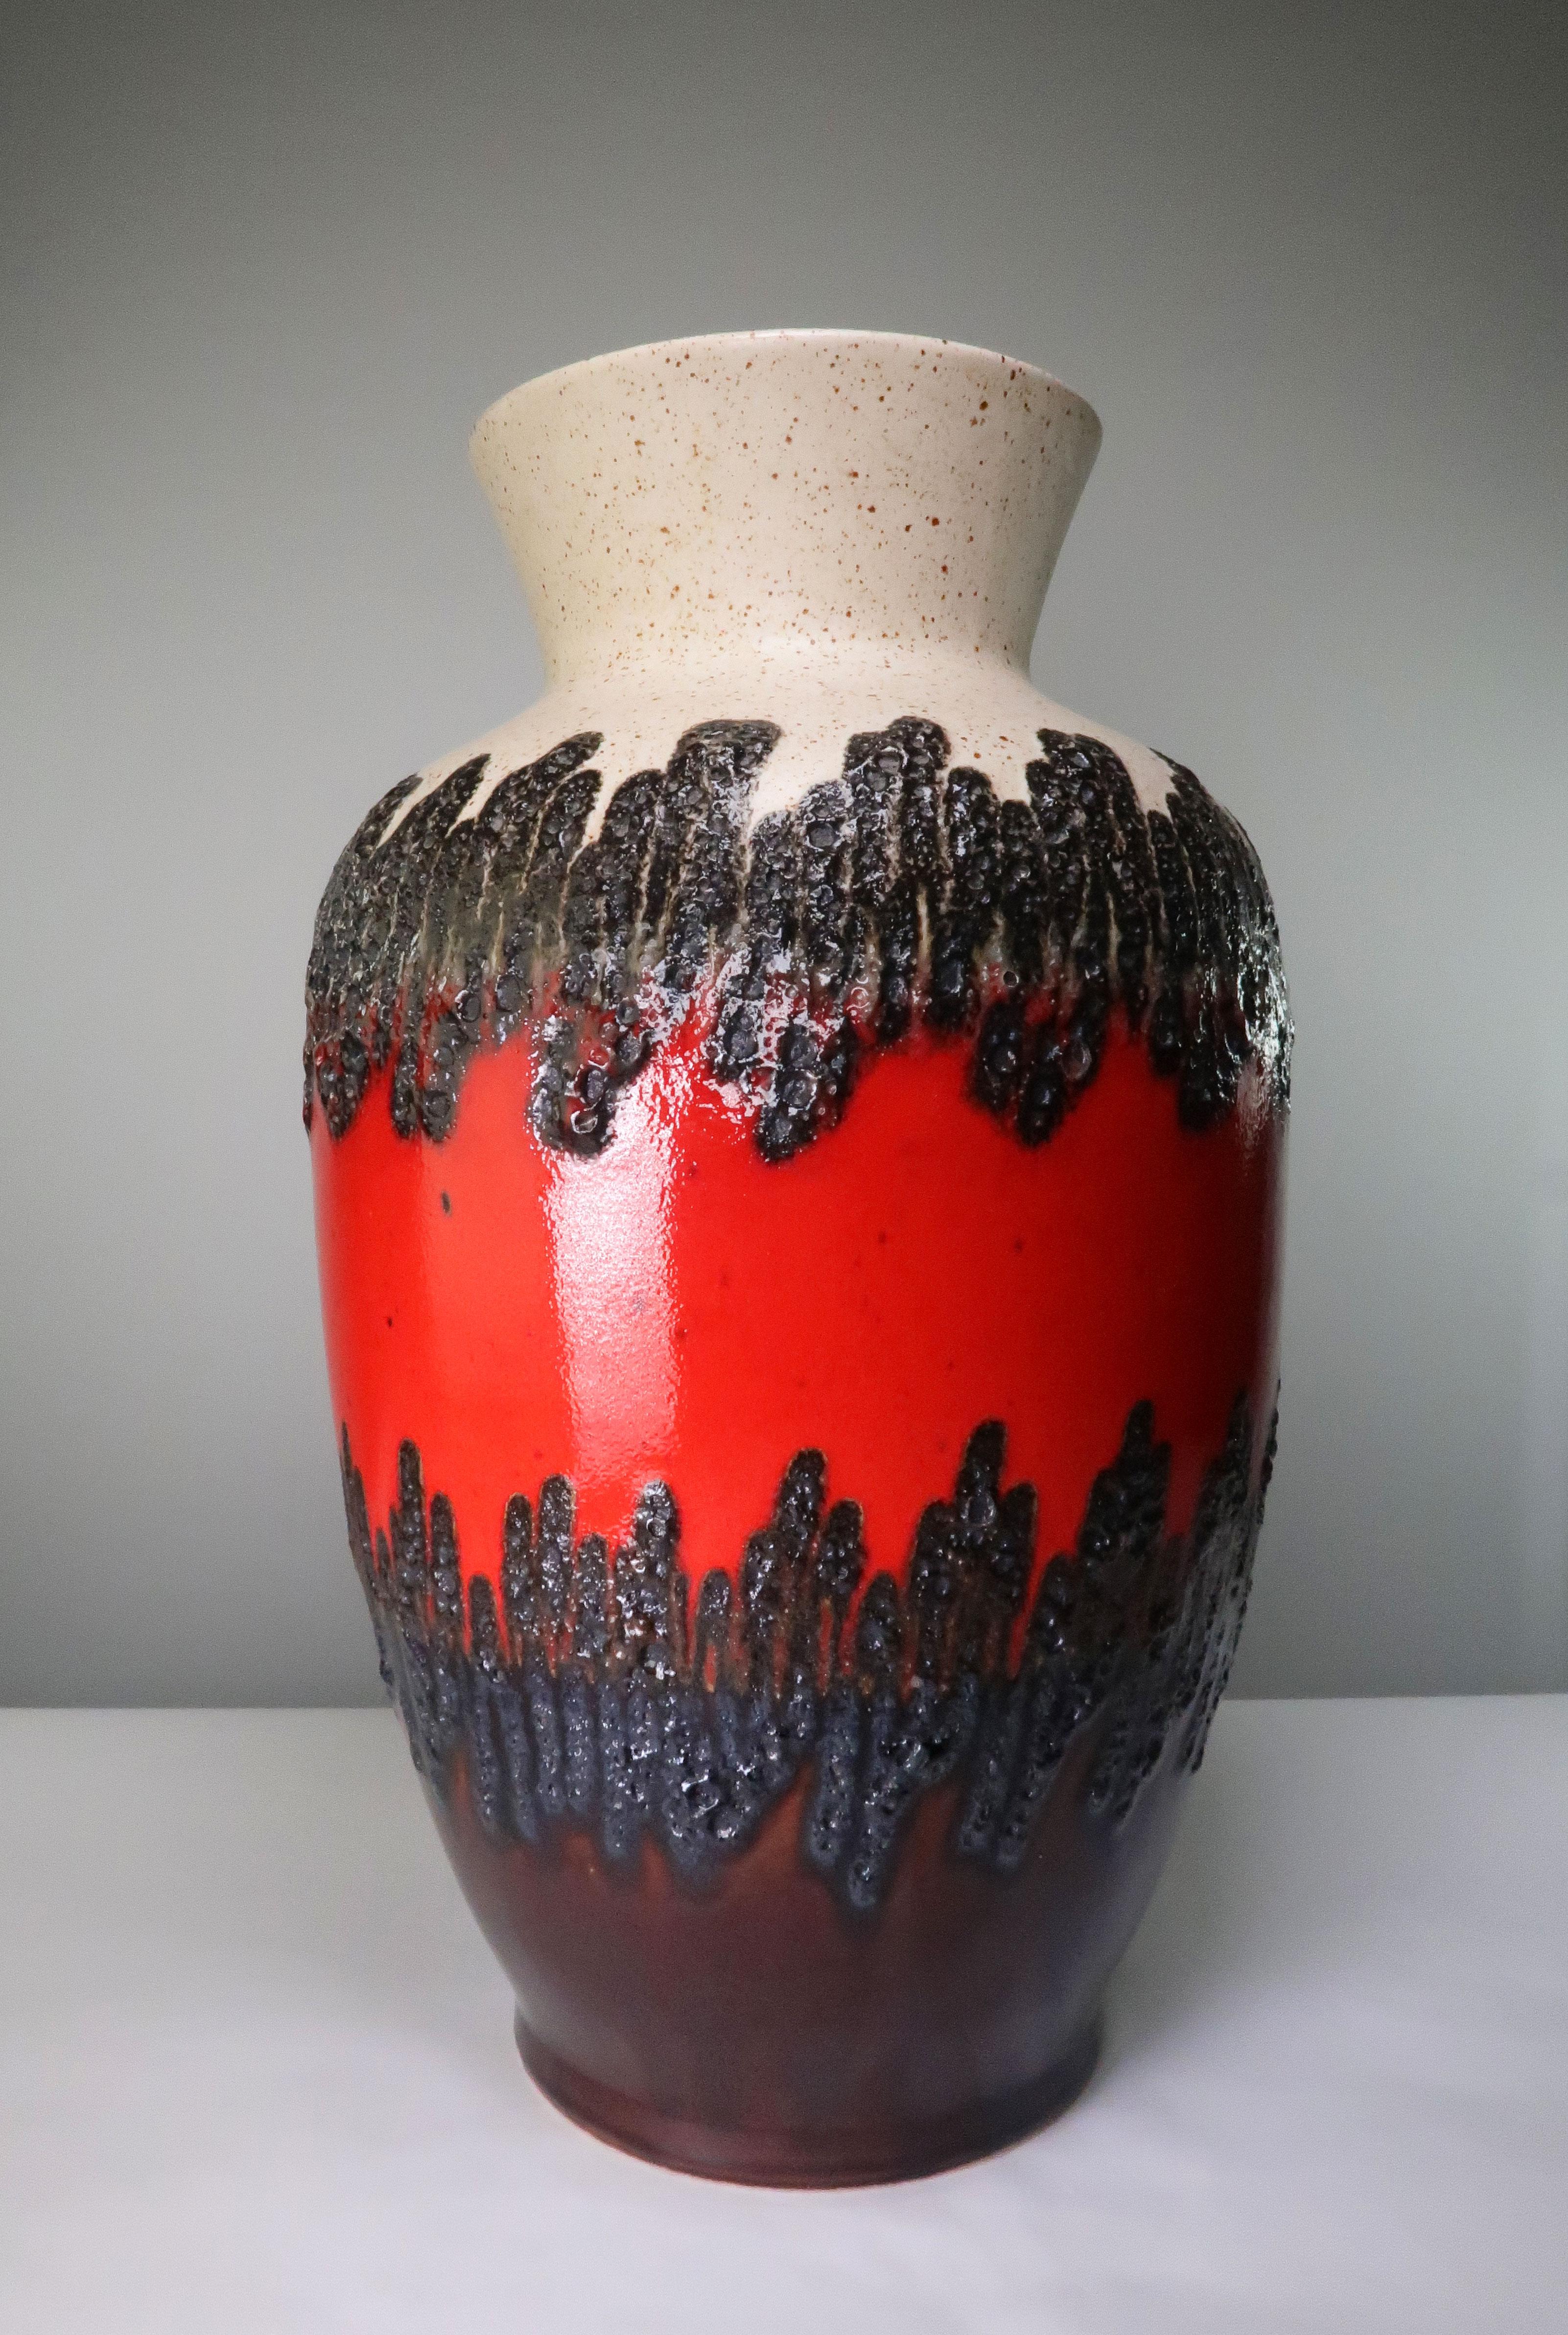 Large Mid-Century Modern floor vase by German ceramics manufacturer Bay Keramik in the 1960s. Shiny and smooth blood red glaze on the belly with black lava glaze on the top and black and dark blue lava glaze underneath. Beige top and interior and